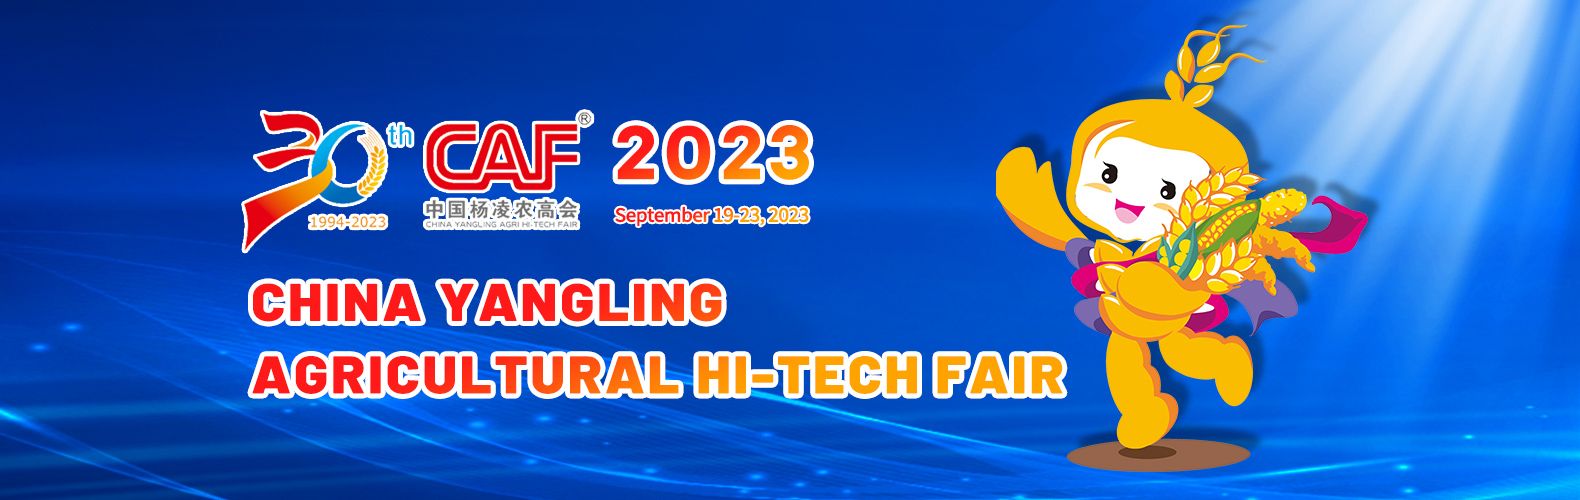 30th china yangling agricultural hi-tech fair opens